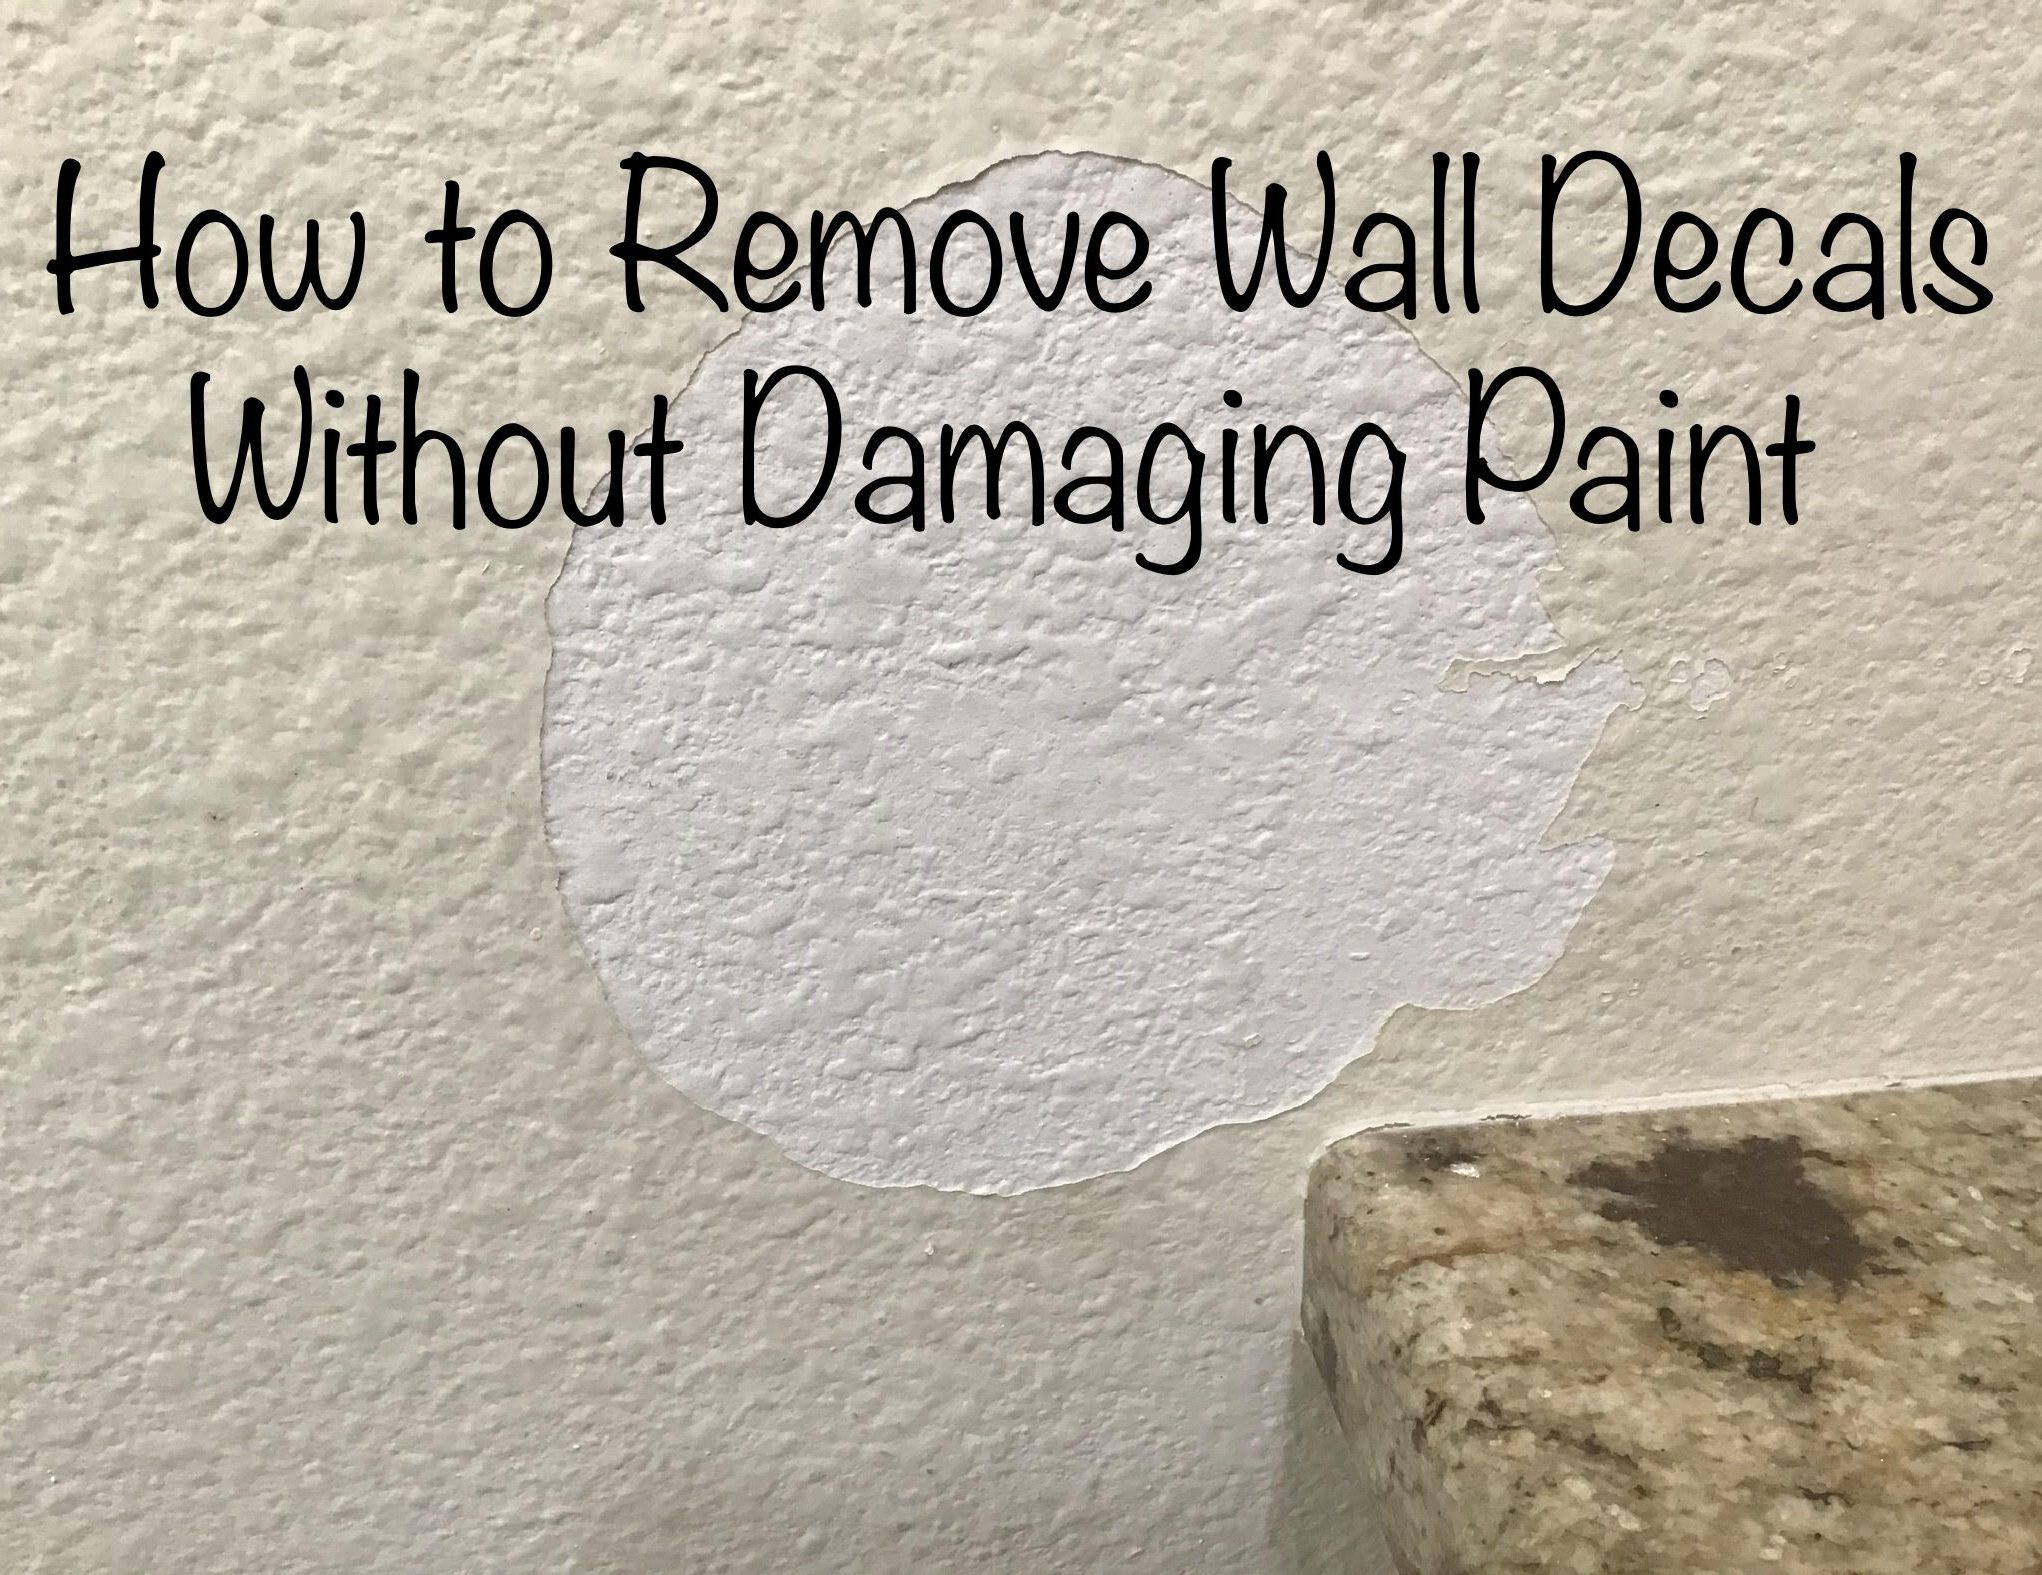 How to Remove Wall Decals Without Damaging Paint